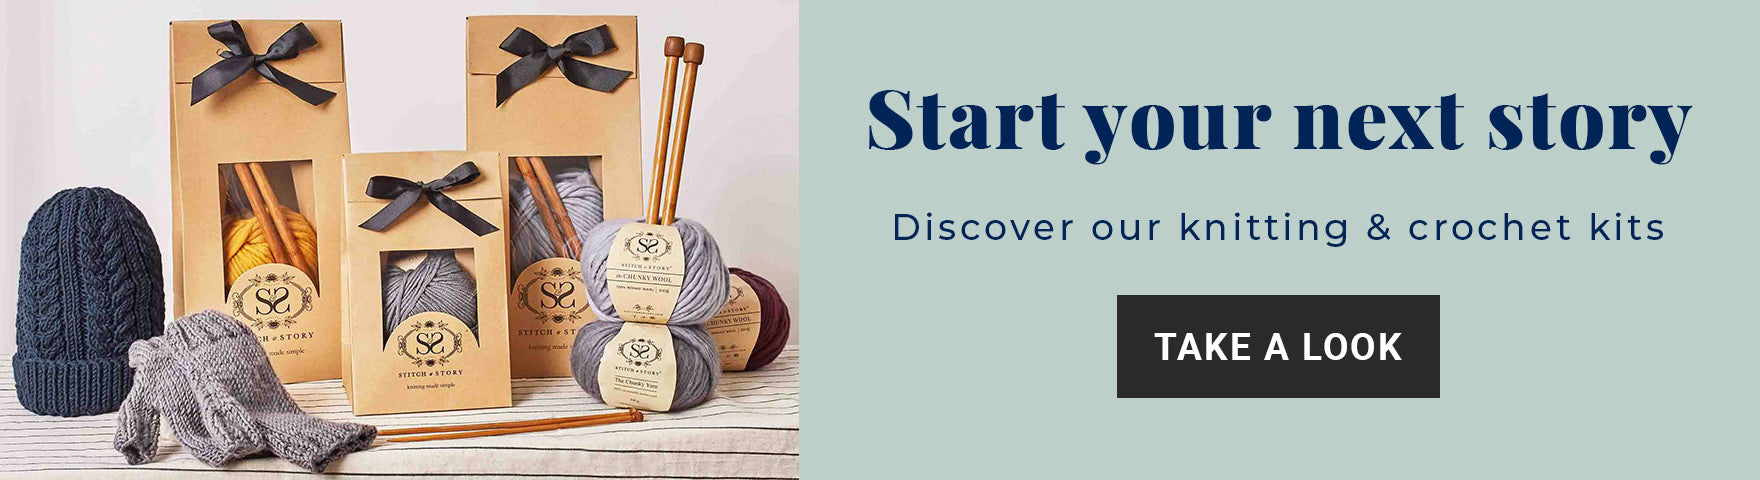 Shop our all-in-one knitting and crochet kits at Stitch & Story